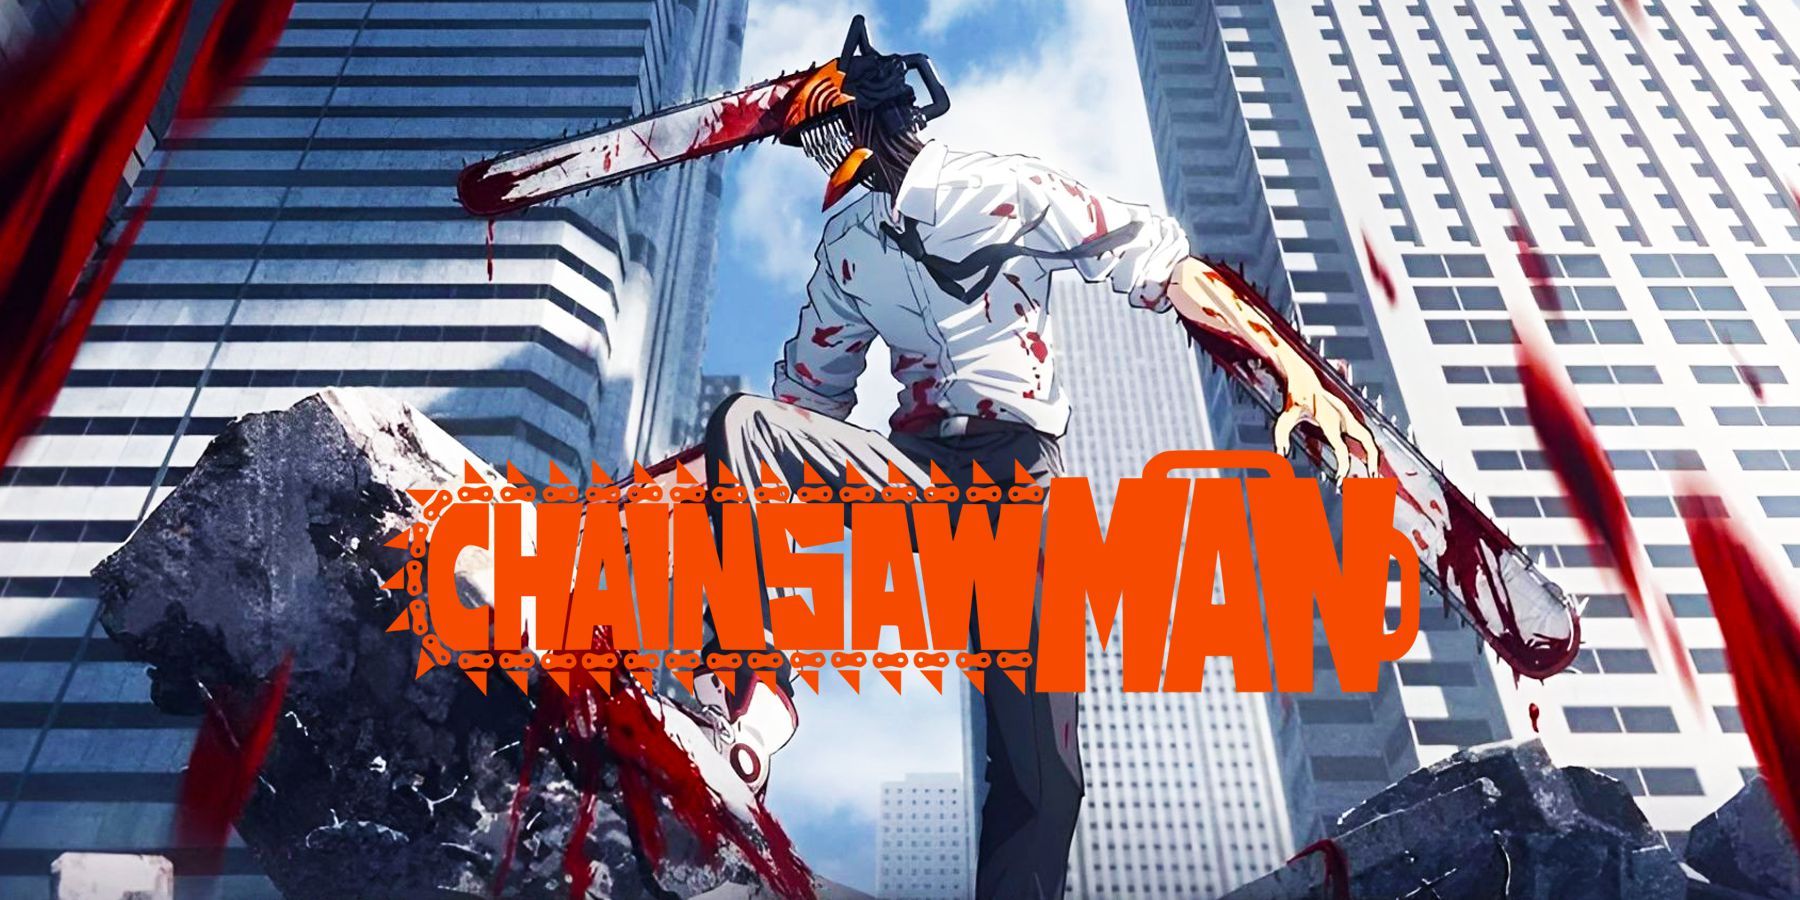 Here Know The Reason Why Mappa Is Delaying Chainsaw Man Season 2